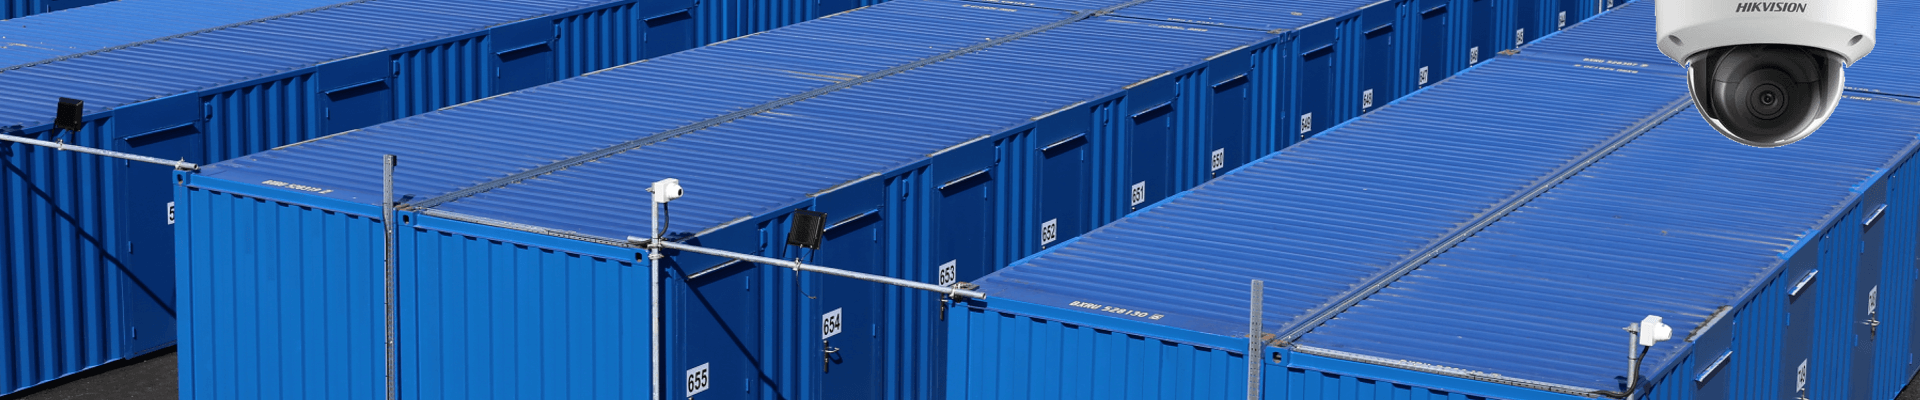 Container Storage in Exeter and Internal Storage in Salisbury